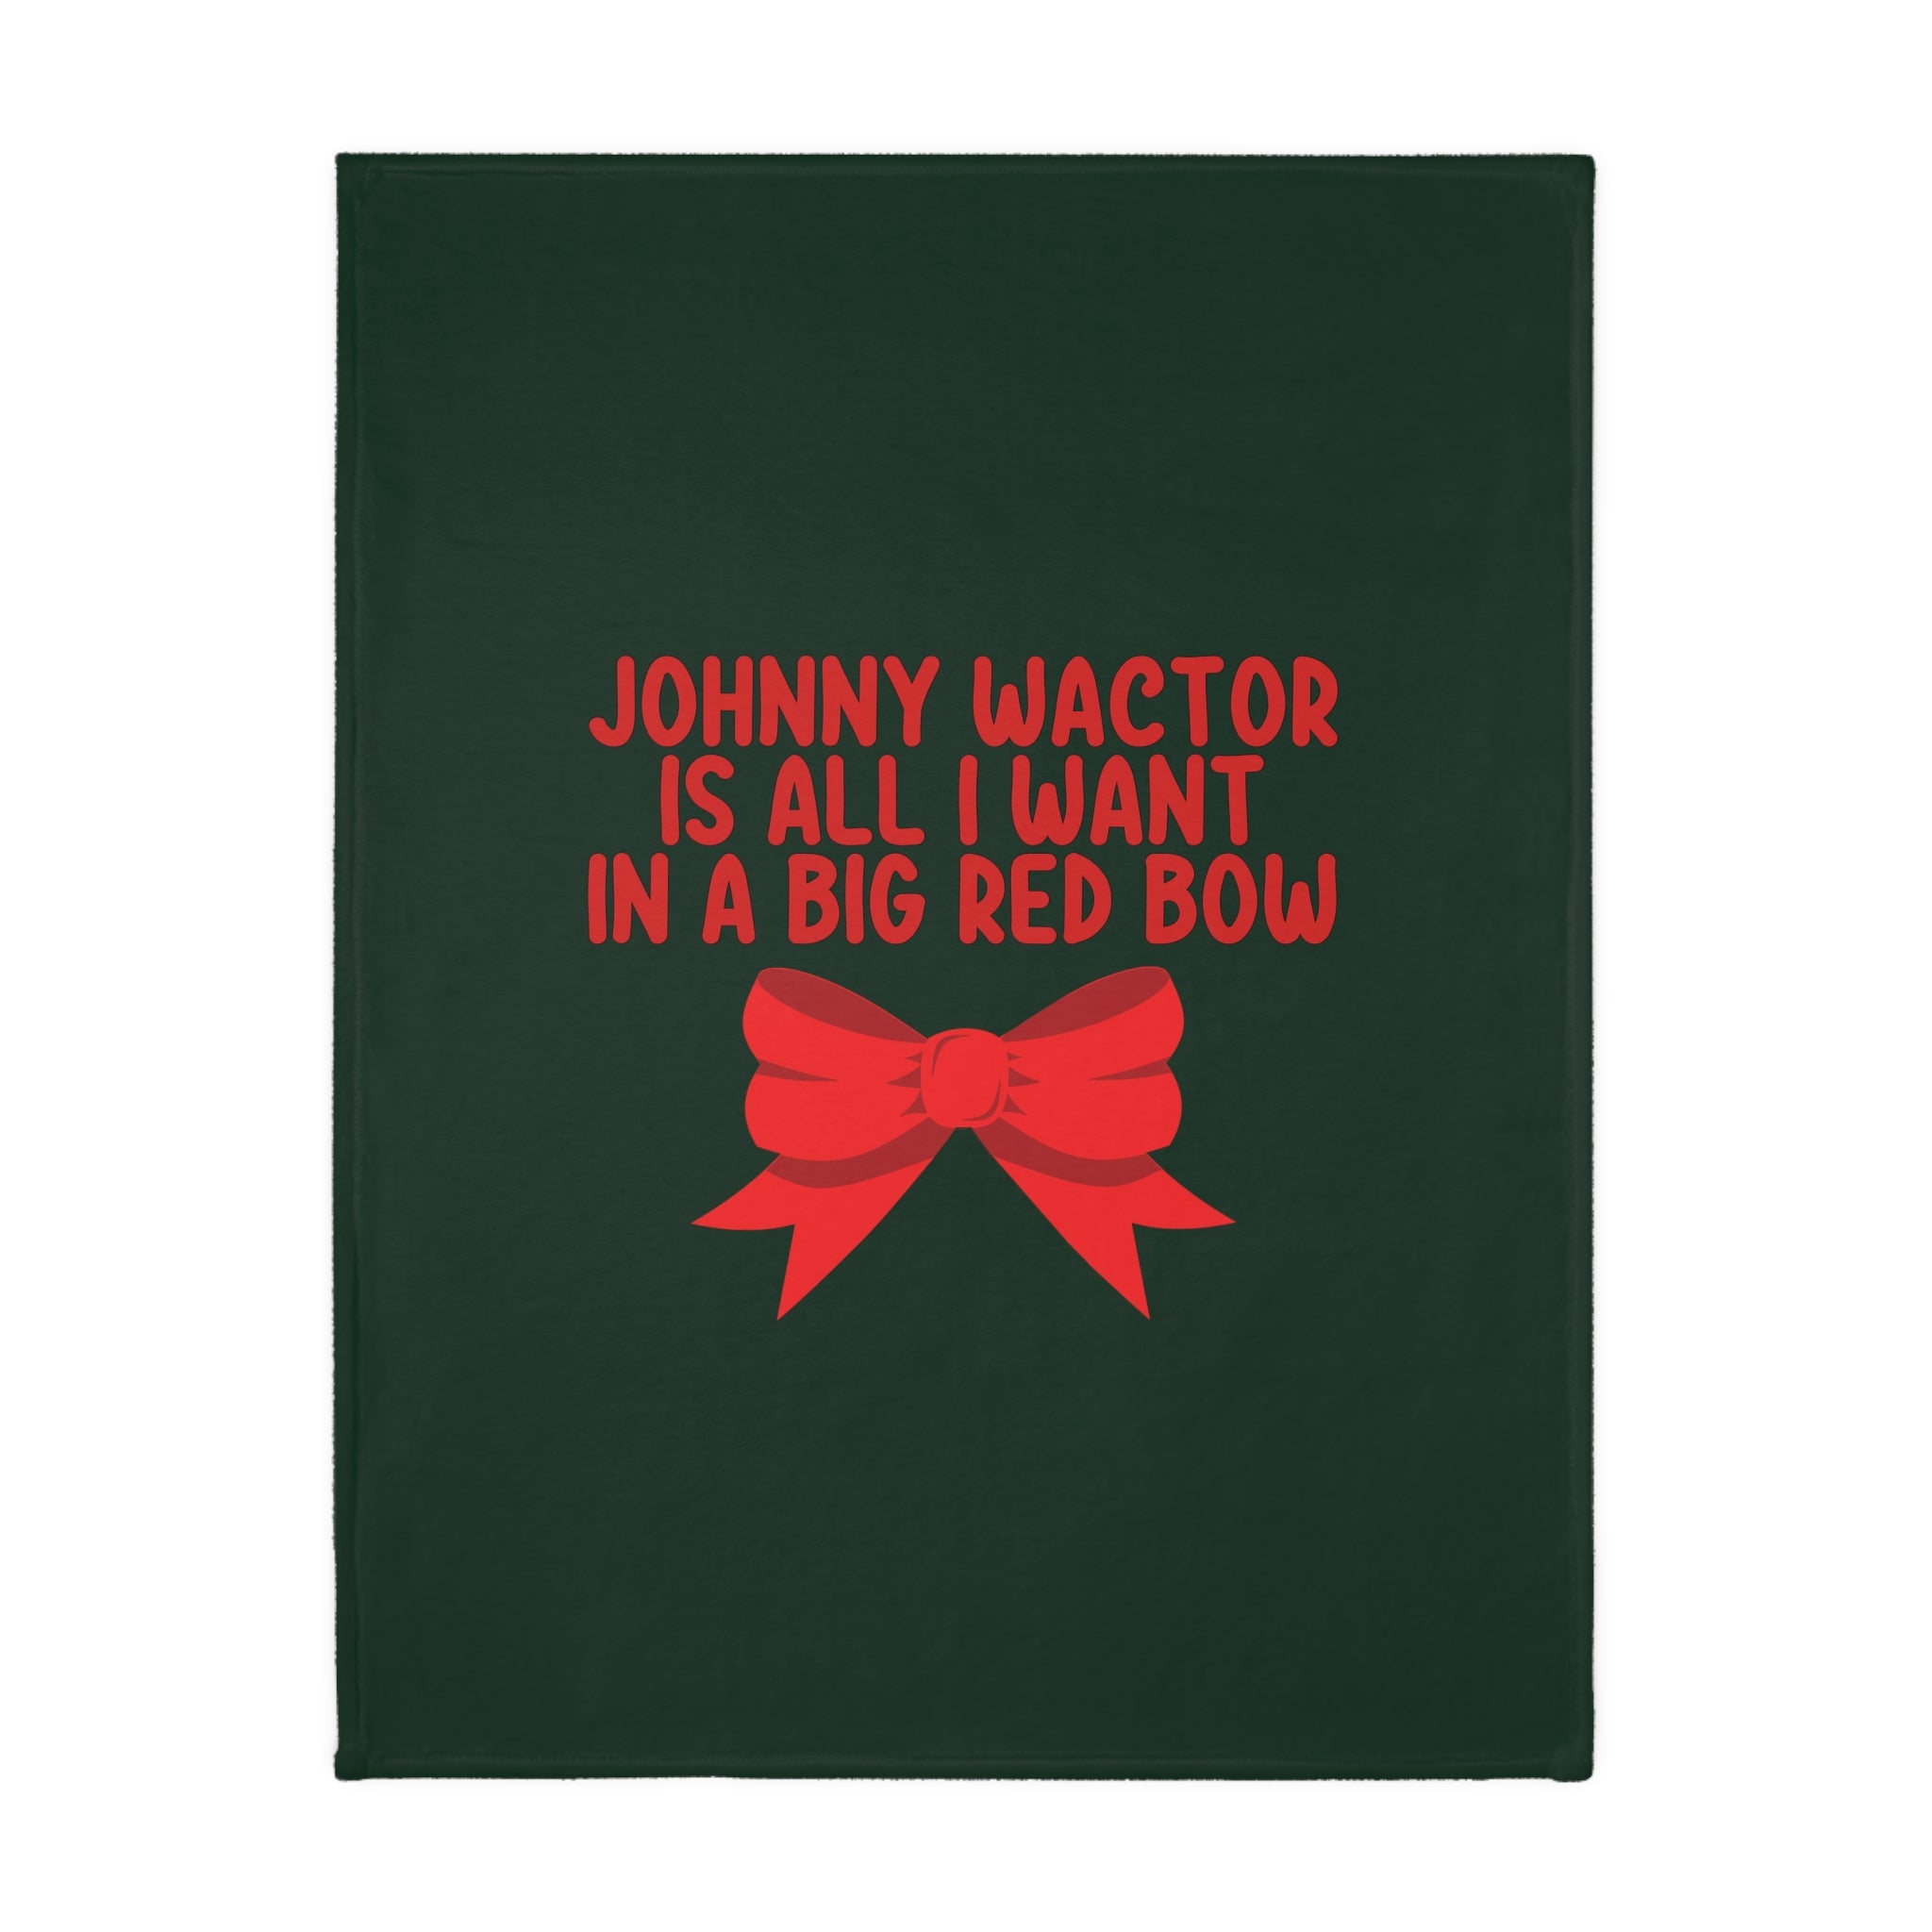 Johnny Wactor is All I Want in a Big Red Bow Velveteen Minky Blanket (Two-sided print)